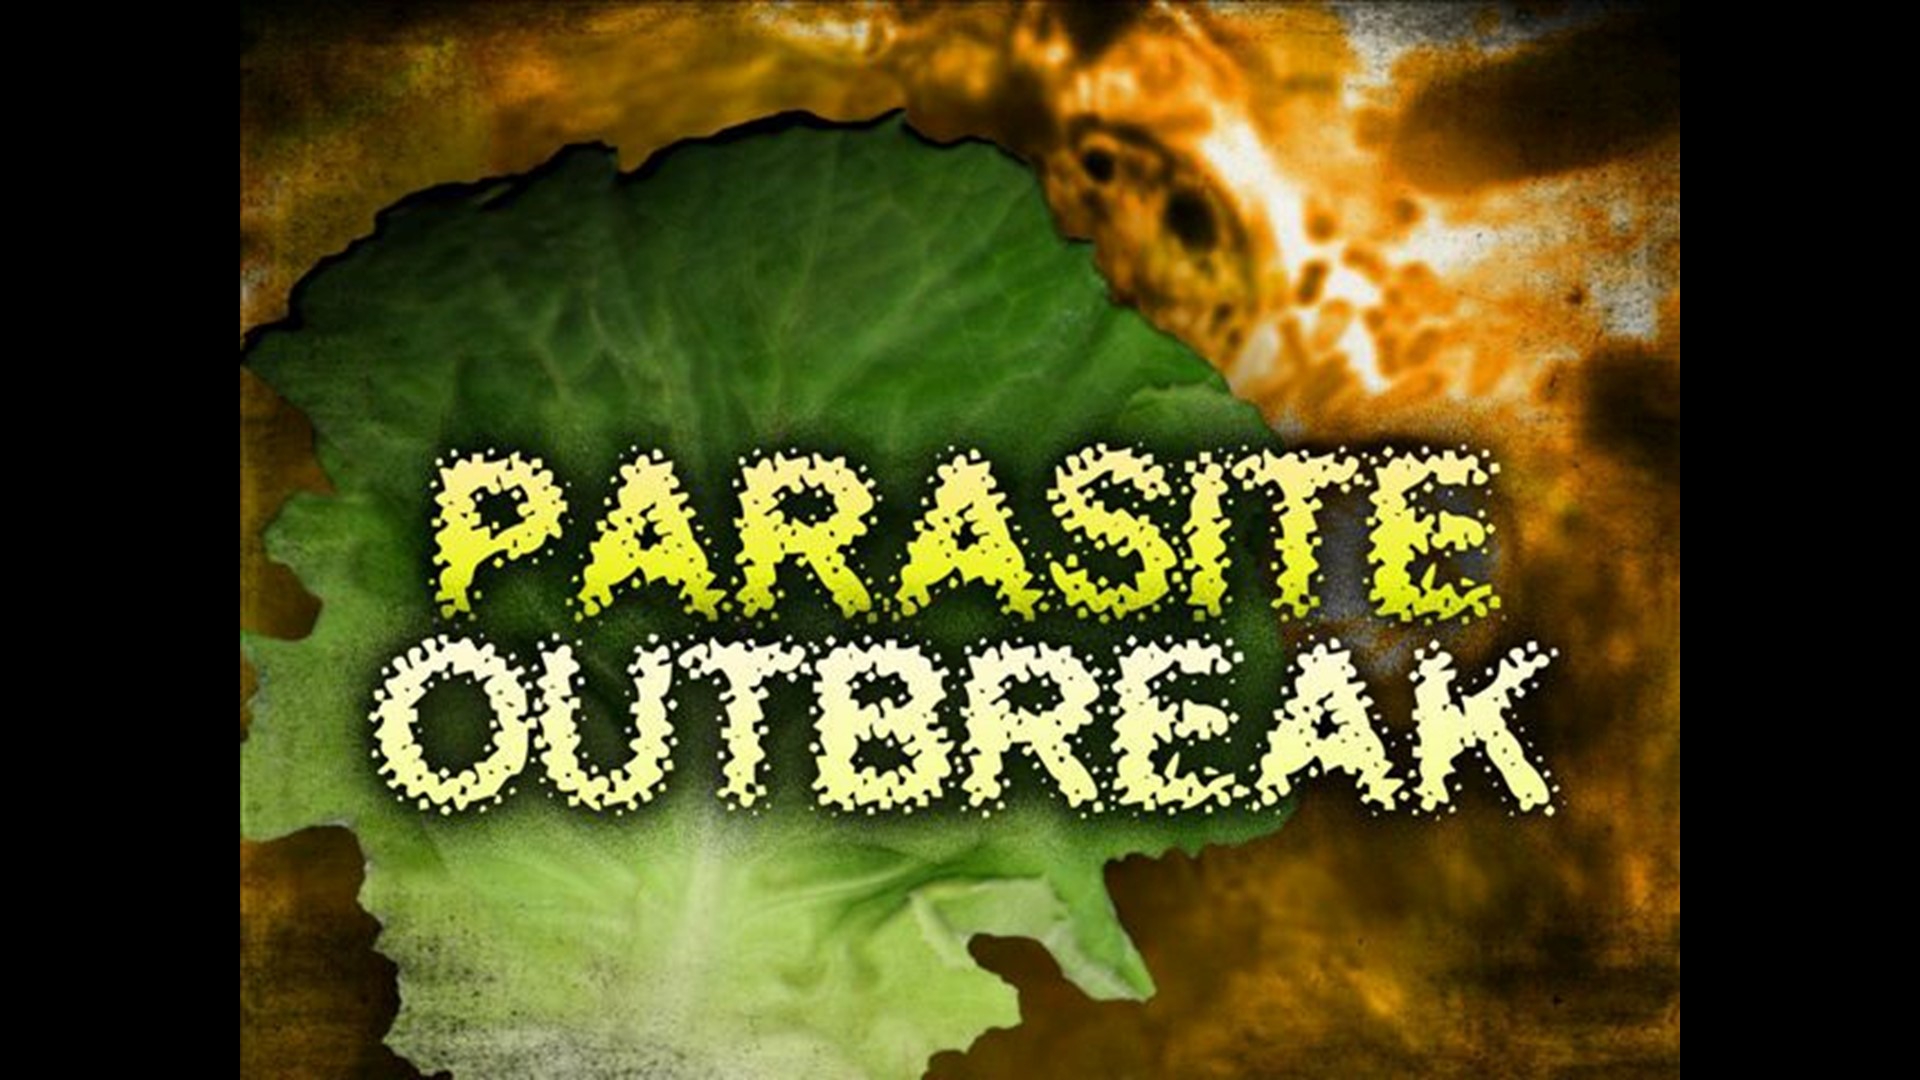 Nationwide stomach bug outbreak hits Ohio